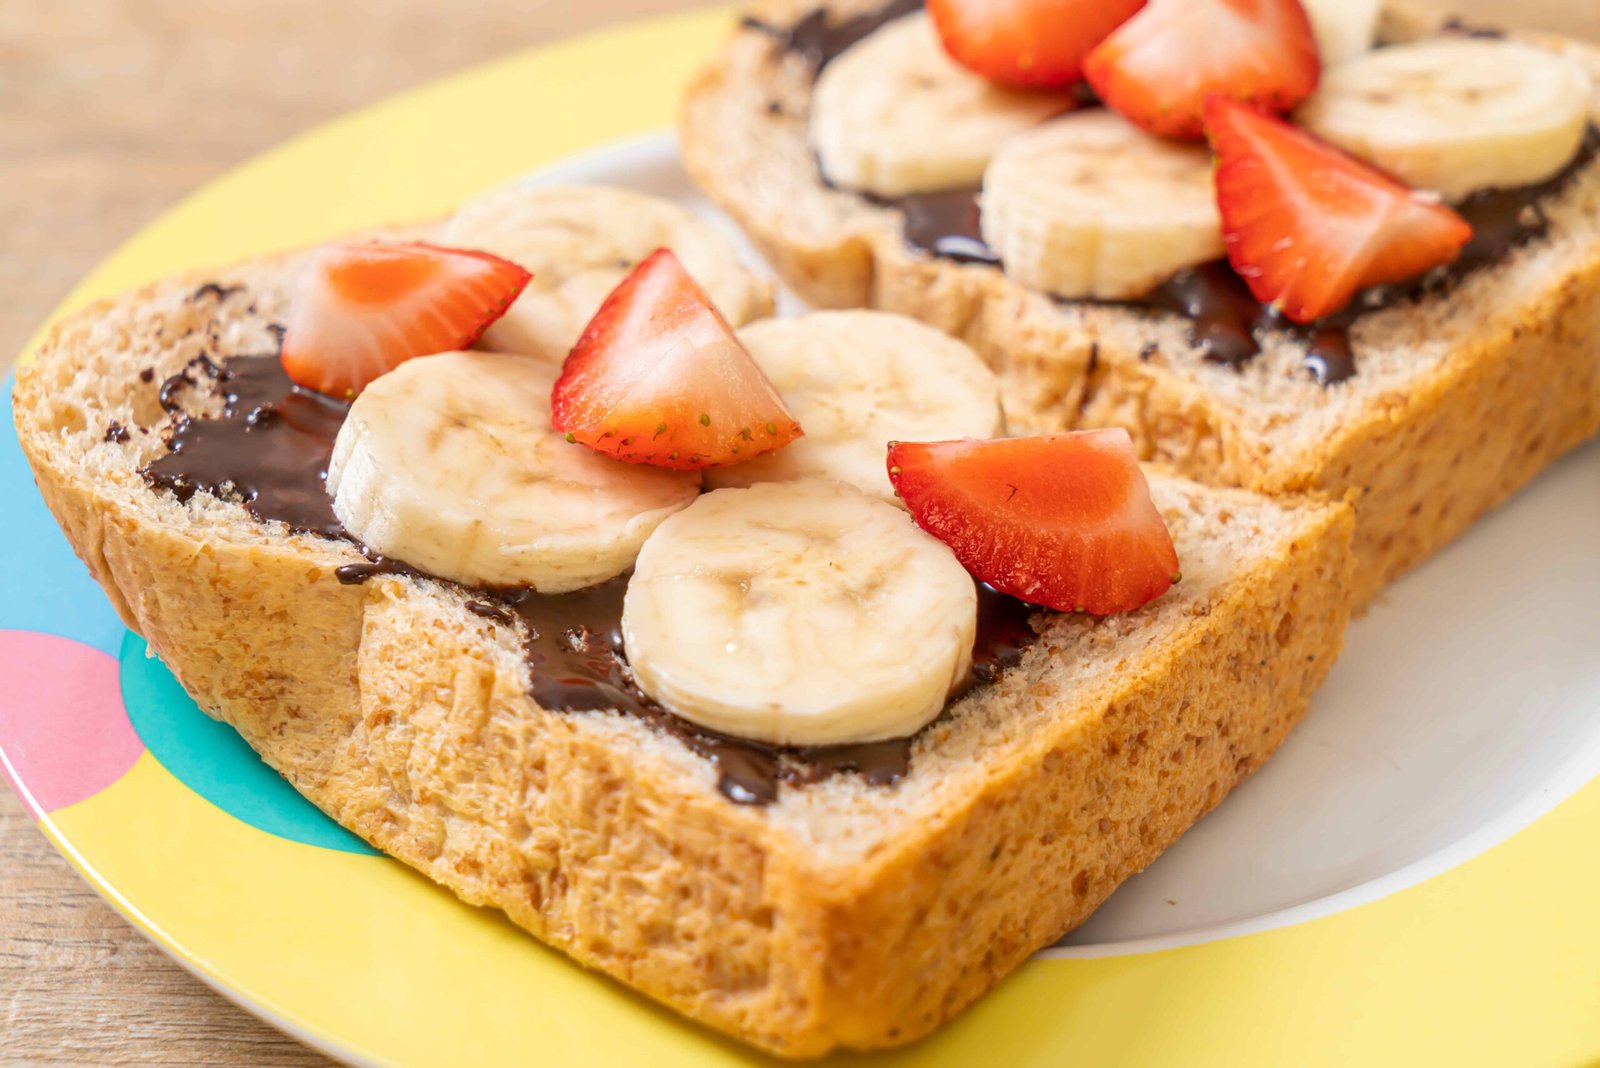 Nutella sandwich with Banana